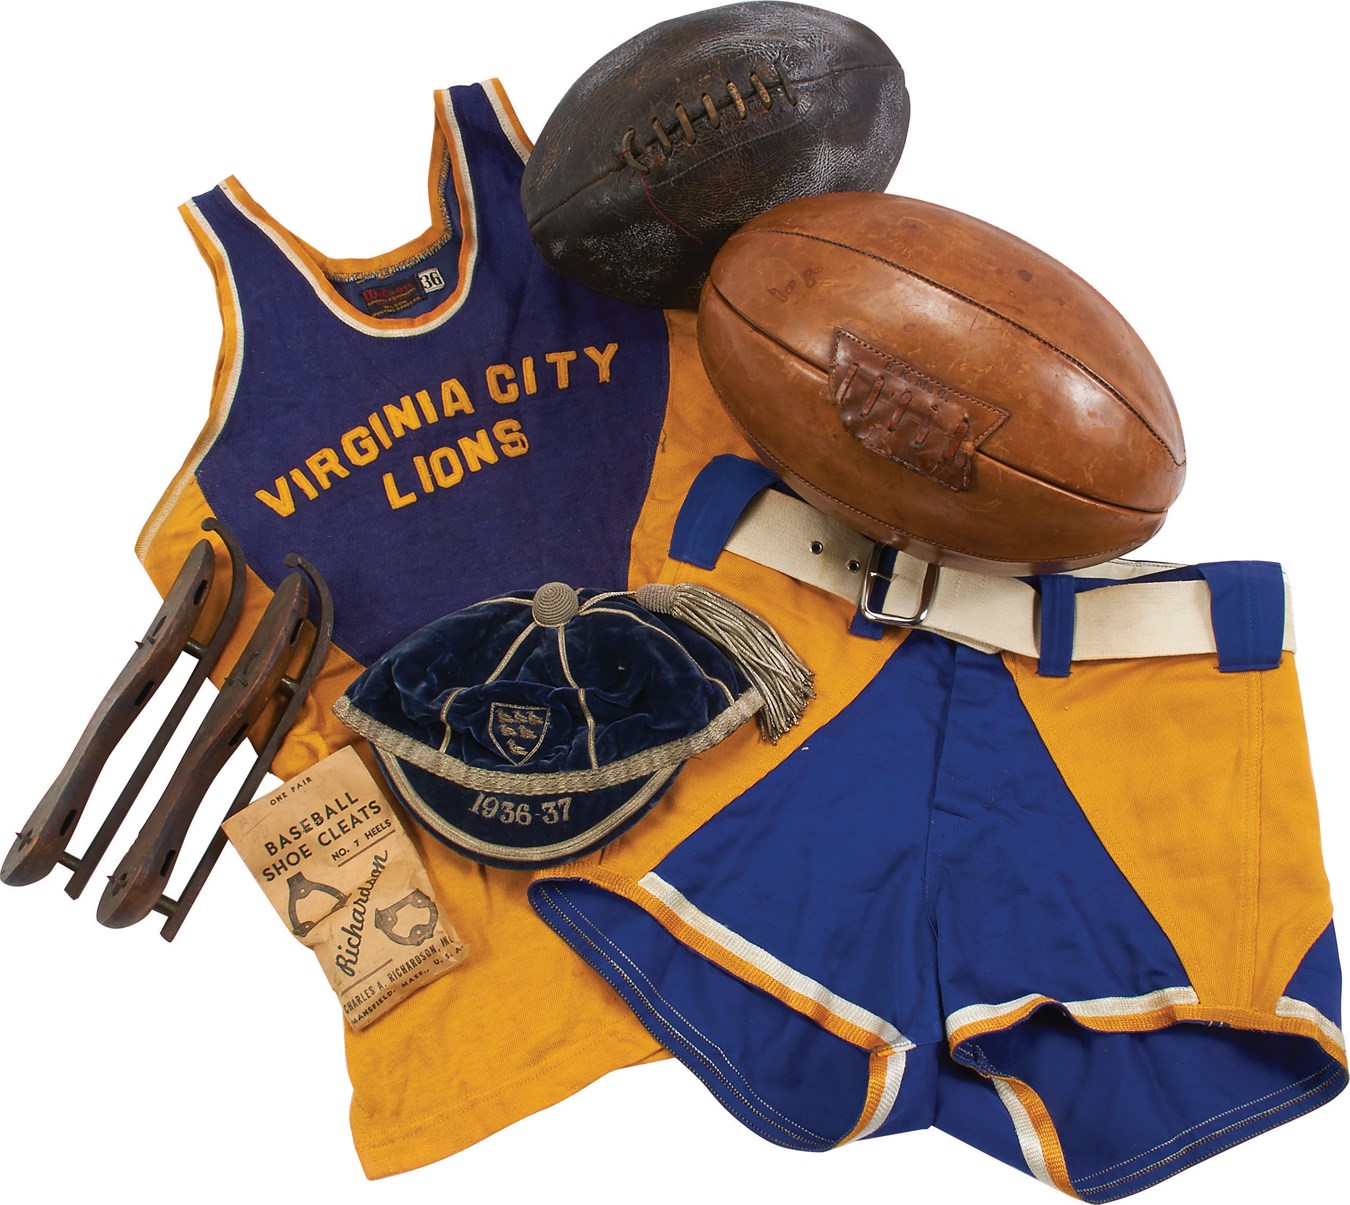 Antique Sporting Goods - Vintage Sports Equipment Collection (70+) - 19th Century & Beyond